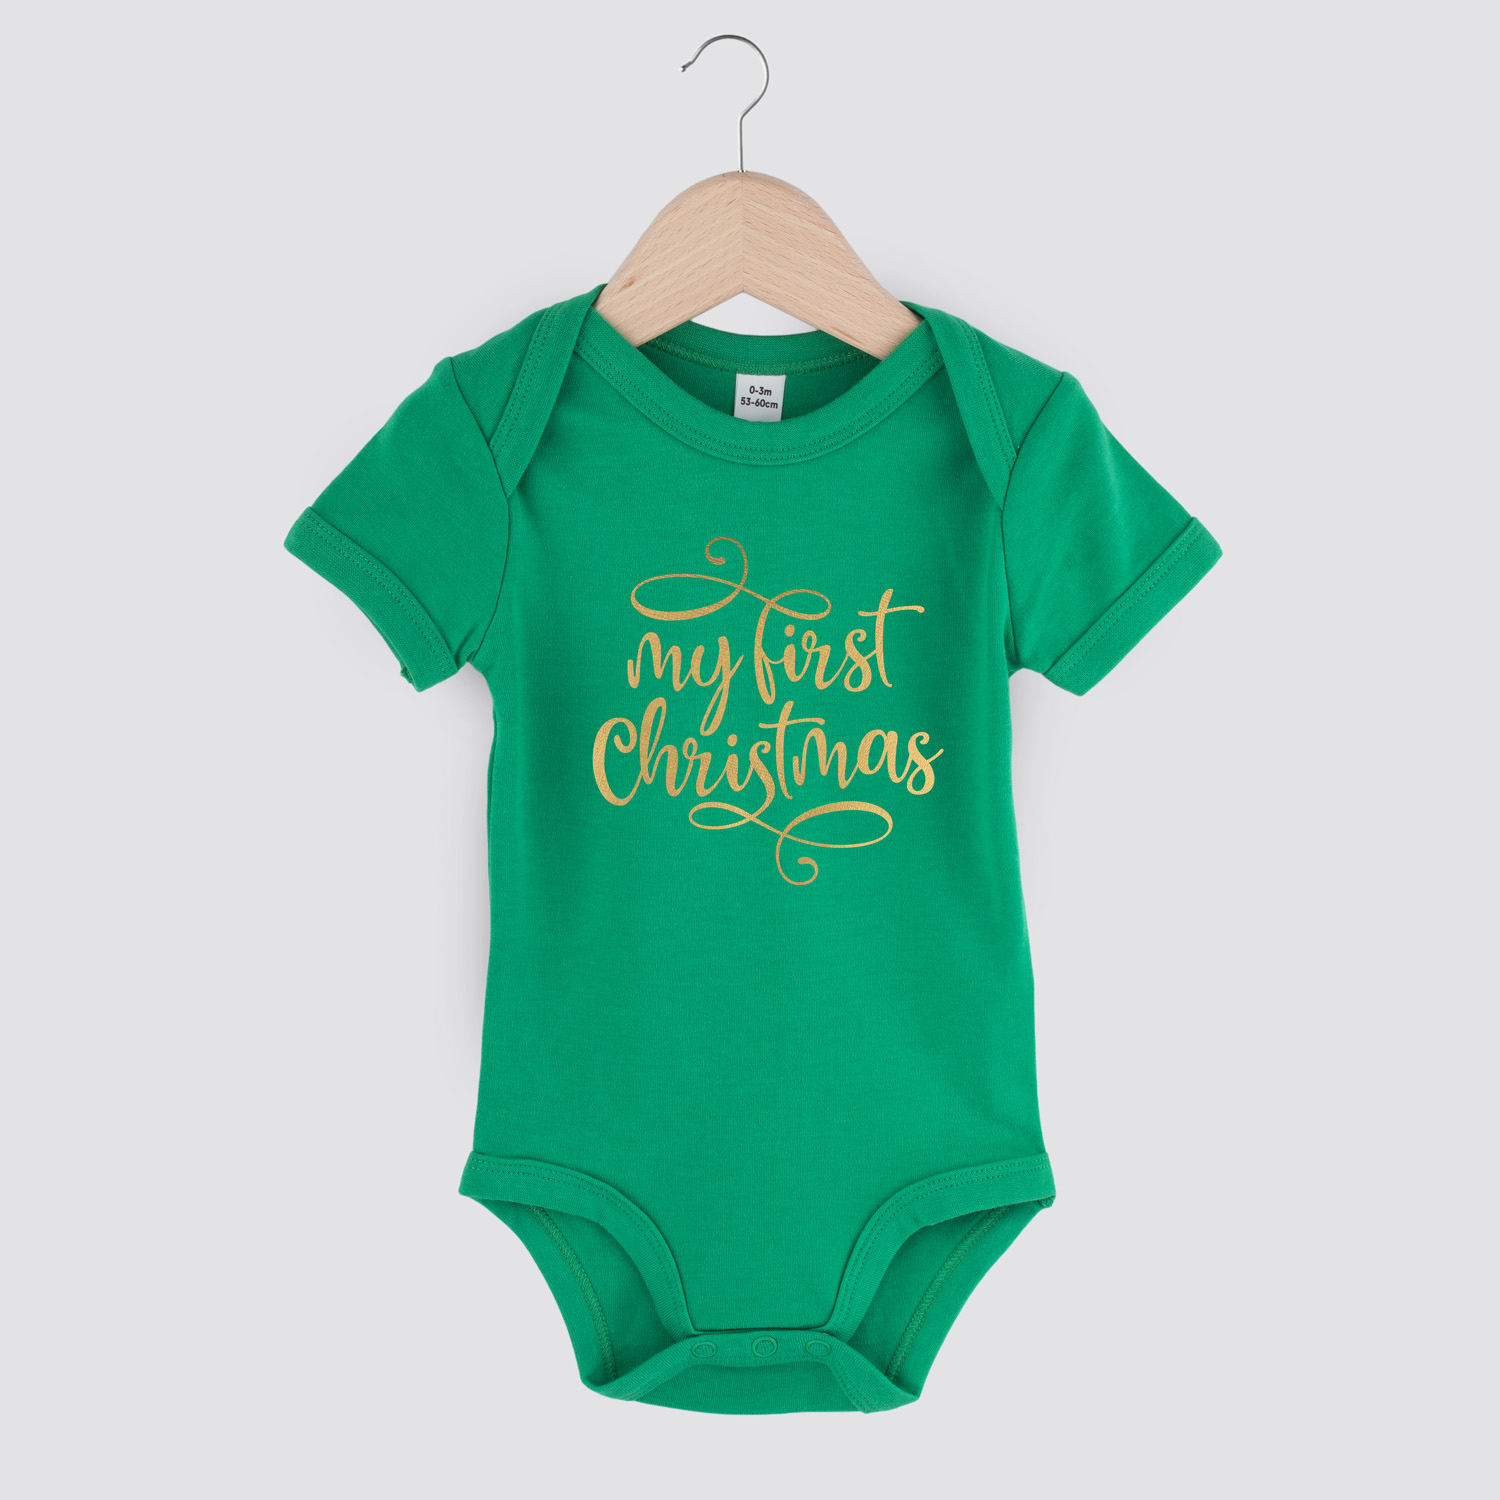 My first Christmas | Baby romper | my fabulous life.